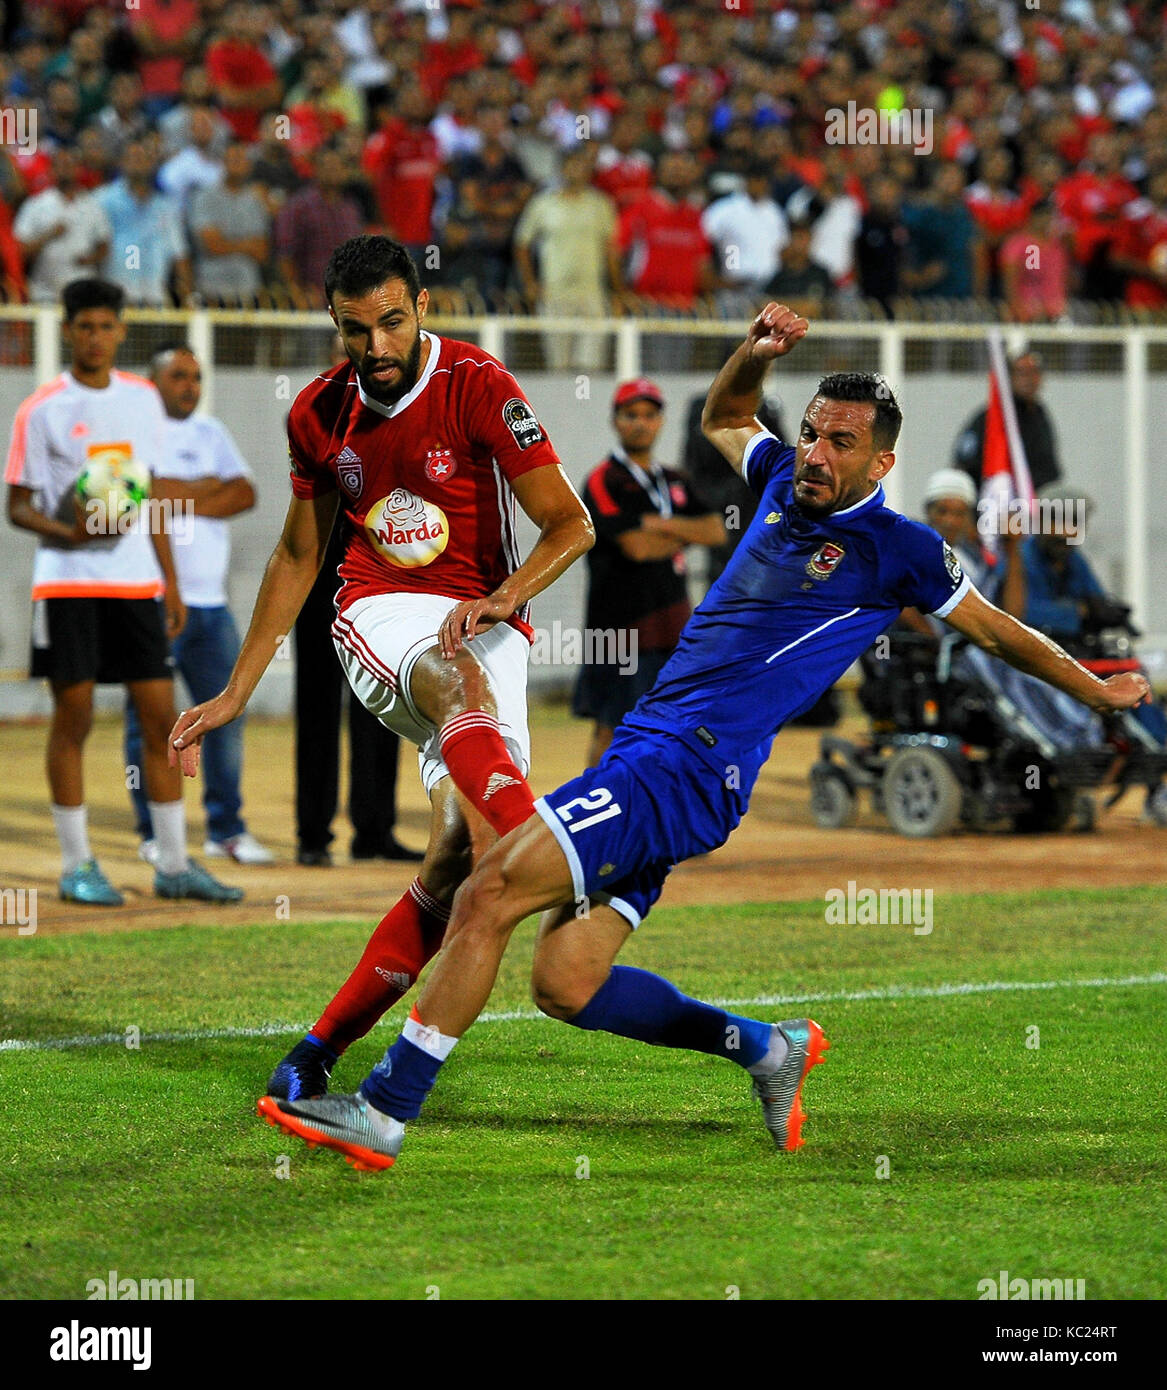 Sousse. 1st Oct, 2017. Ali Maaloul (R) of Egypt's Al Ahly vies with a player of Tunisian Etoile sportive du Sahel during CAF Champions League semifinal first leg match at the Olympic Stadium in Sousse, Tunisia on Oct.1, 2017. Etoile sportive du Sahel won 2-1. Credit: Adele Ezzine/Xinhua/Alamy Live News Stock Photo